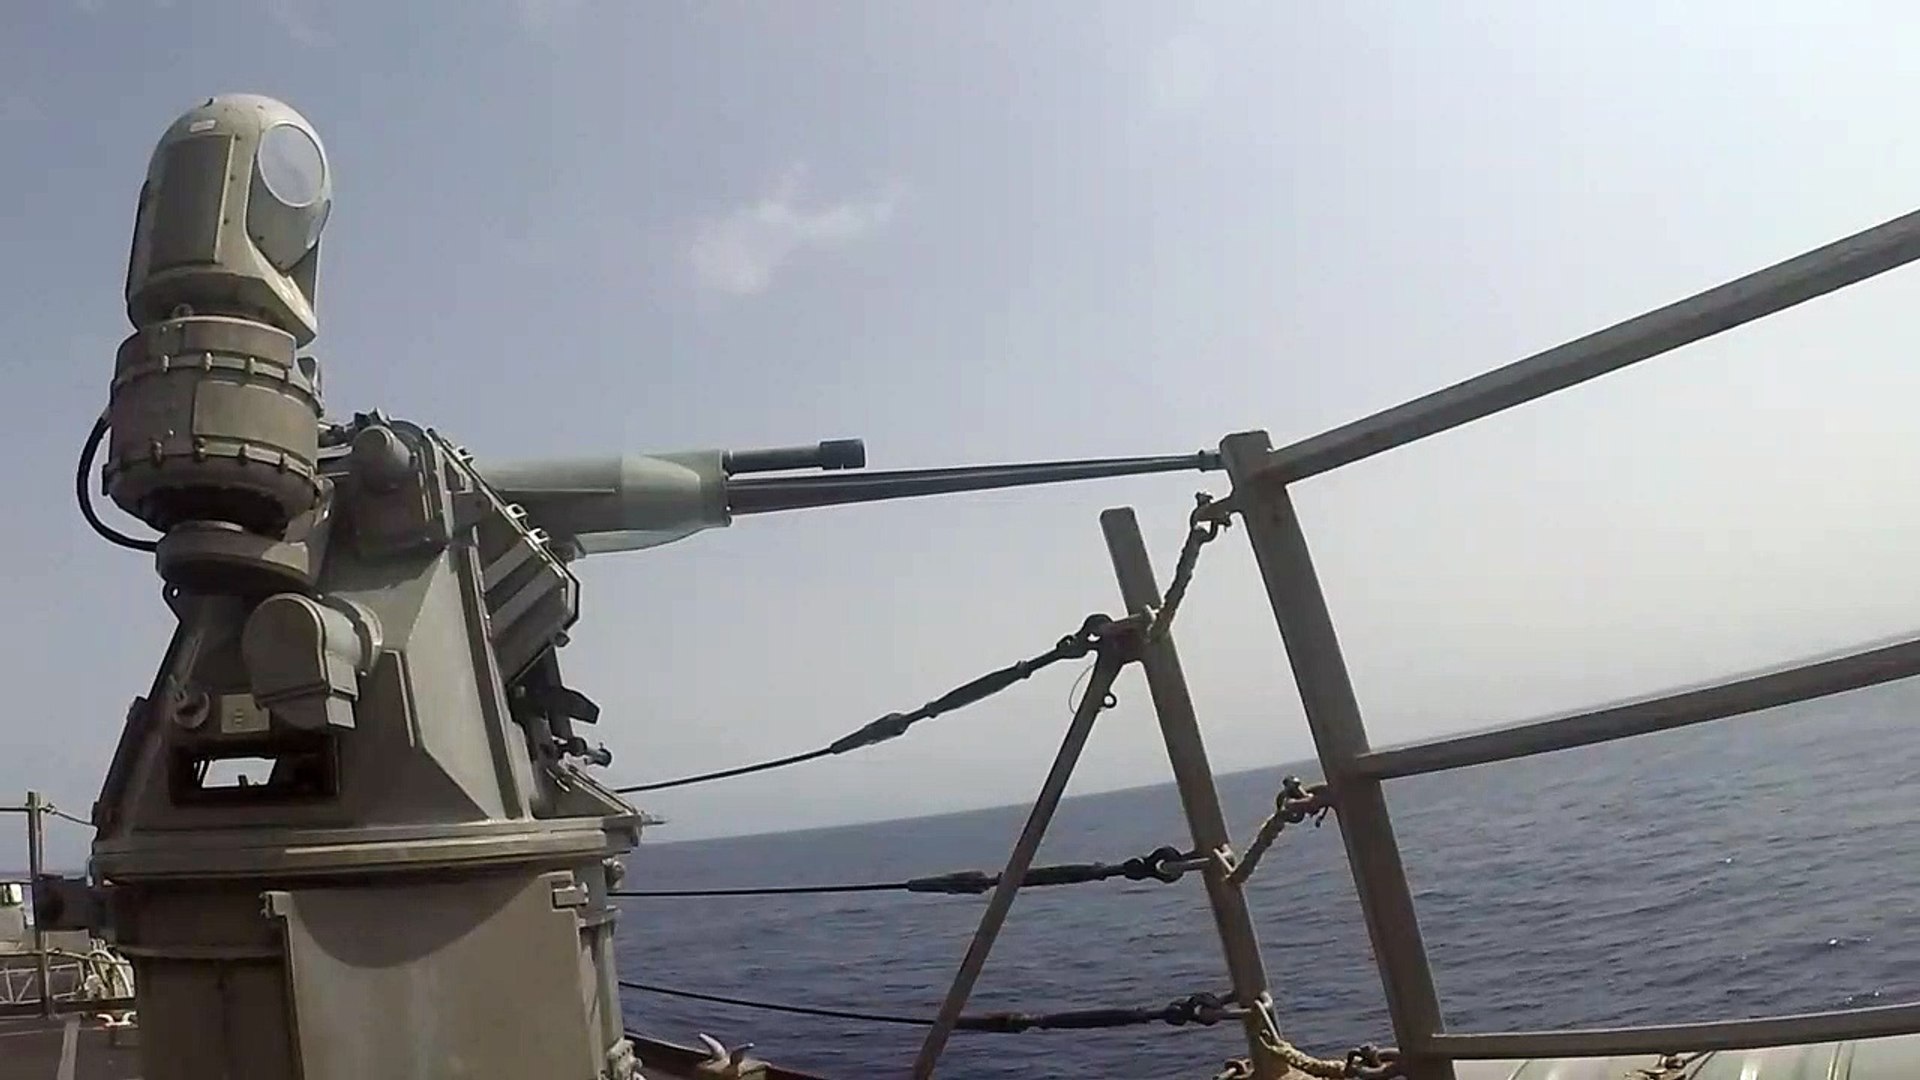 USS Sterett • Live Fires 25mm Cannon Remotely • Red Sea , 2020